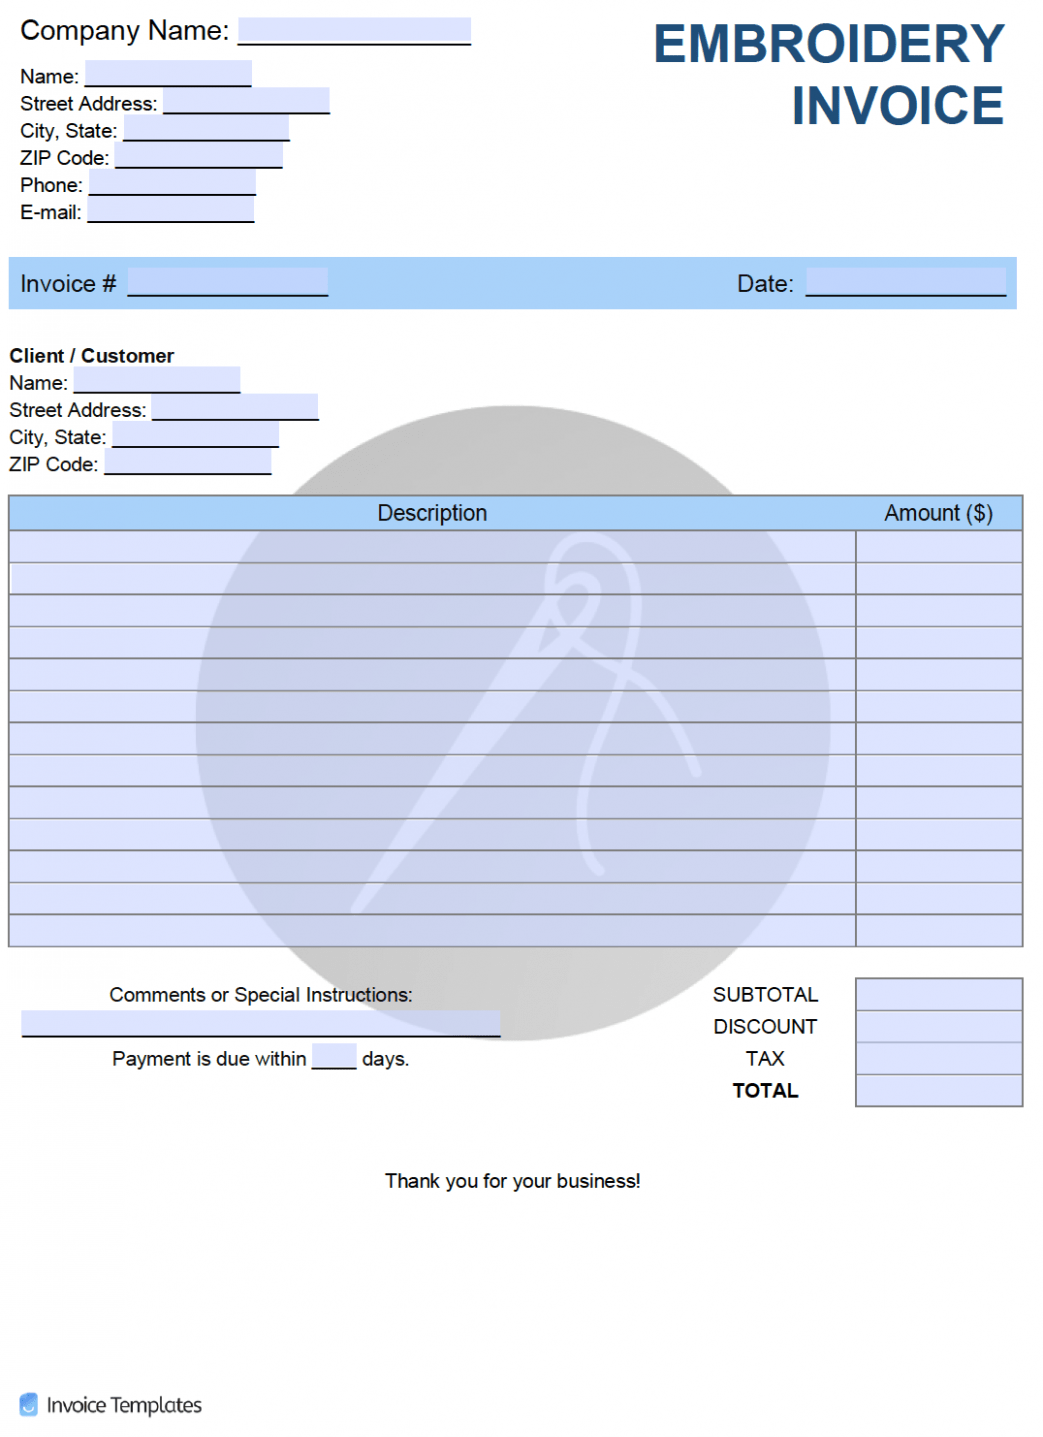 Printable Embroidery Invoice Template Doc